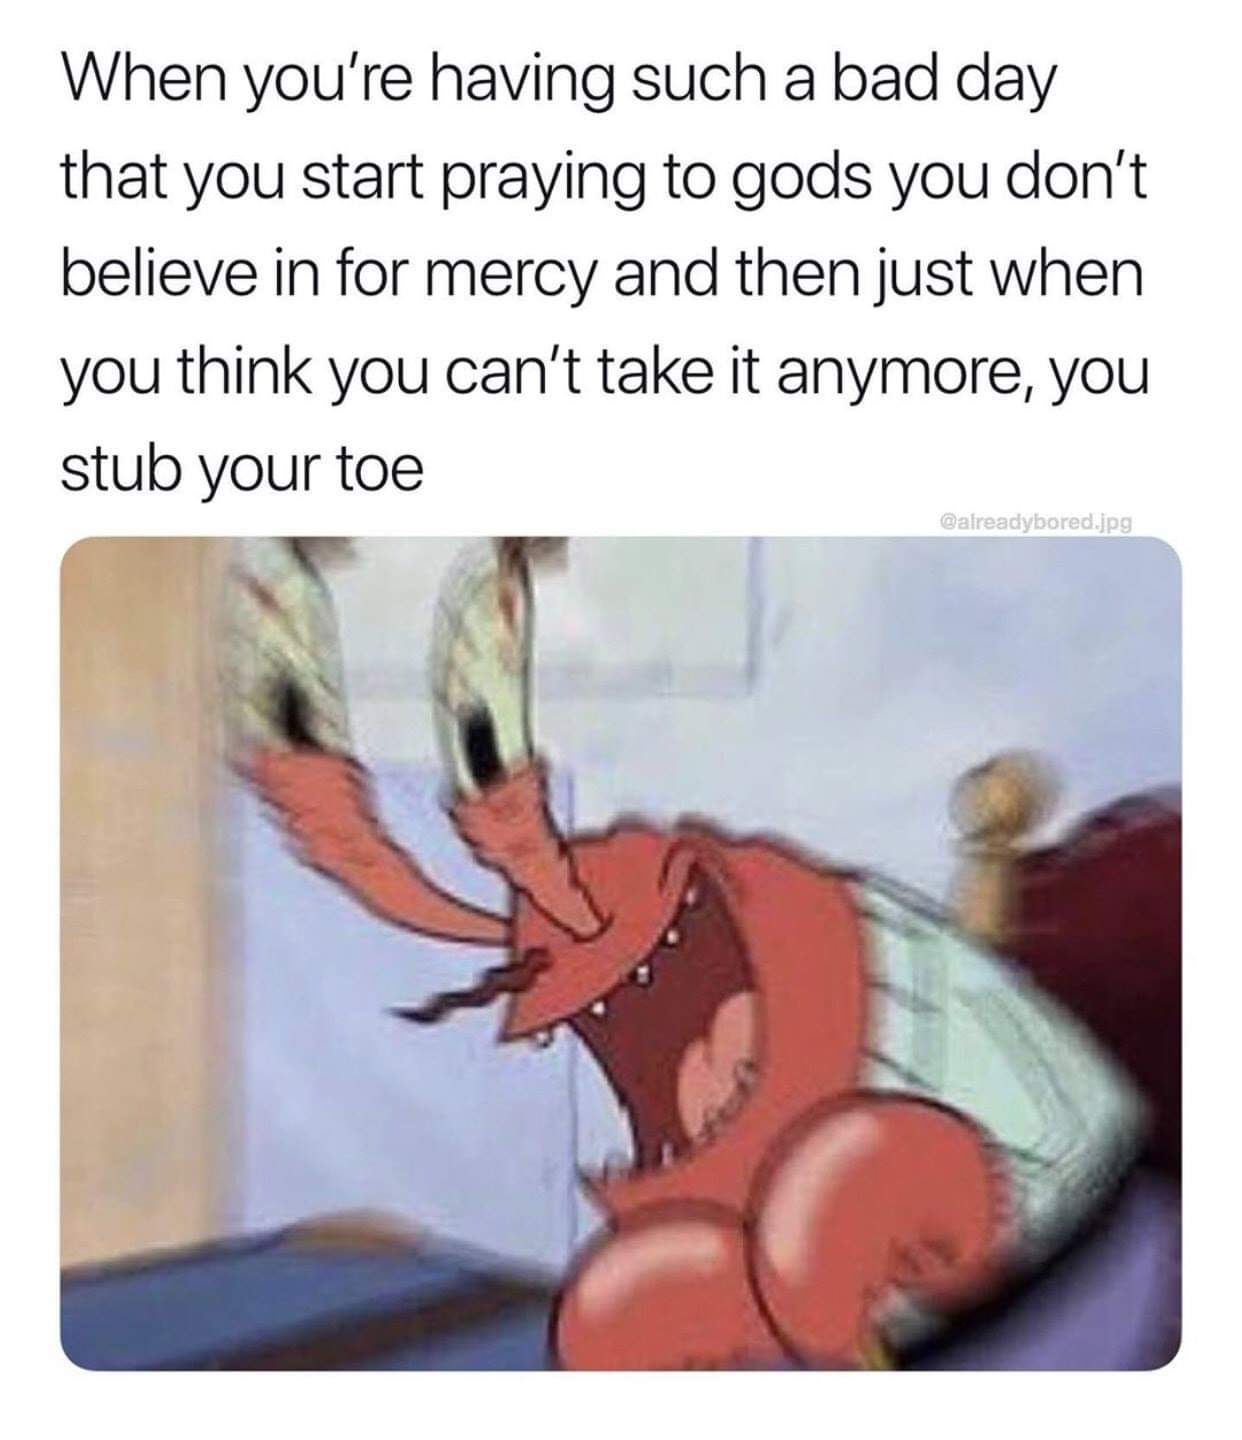 Depression meme - r bikinibottomtwitter - When you're having such a bad day that you start praying to gods you don't believe in for mercy and then just when you think you can't take it anymore, you stub your toe .jpg